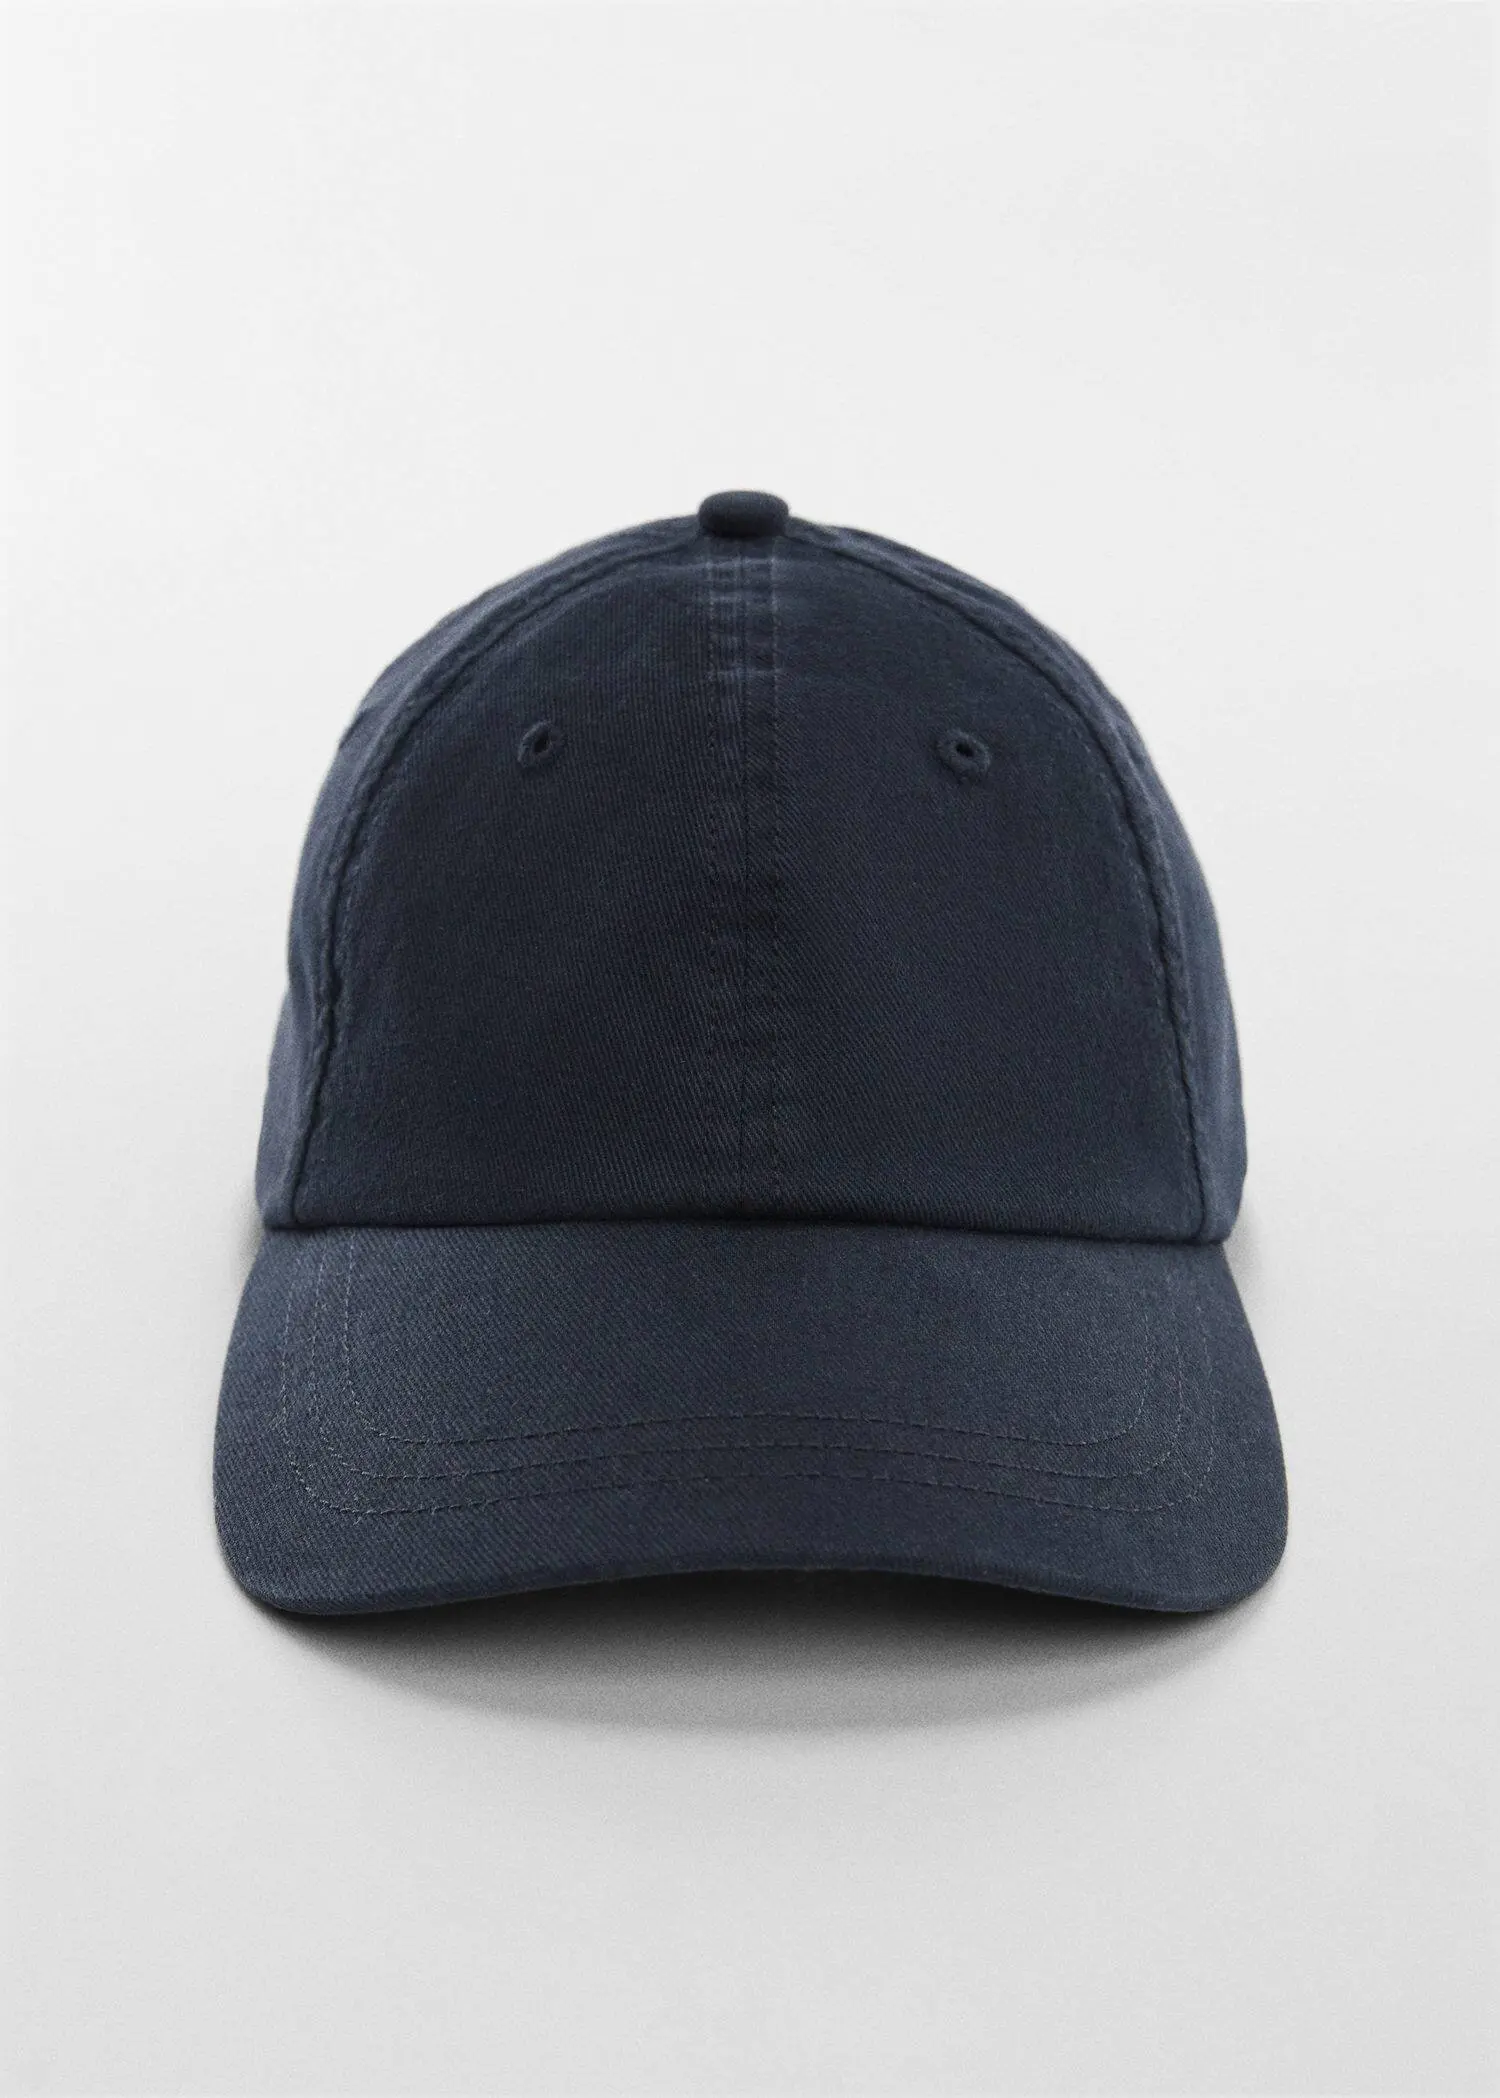 Mango Organic cotton cap. a baseball cap is shown on top of a white surface. 